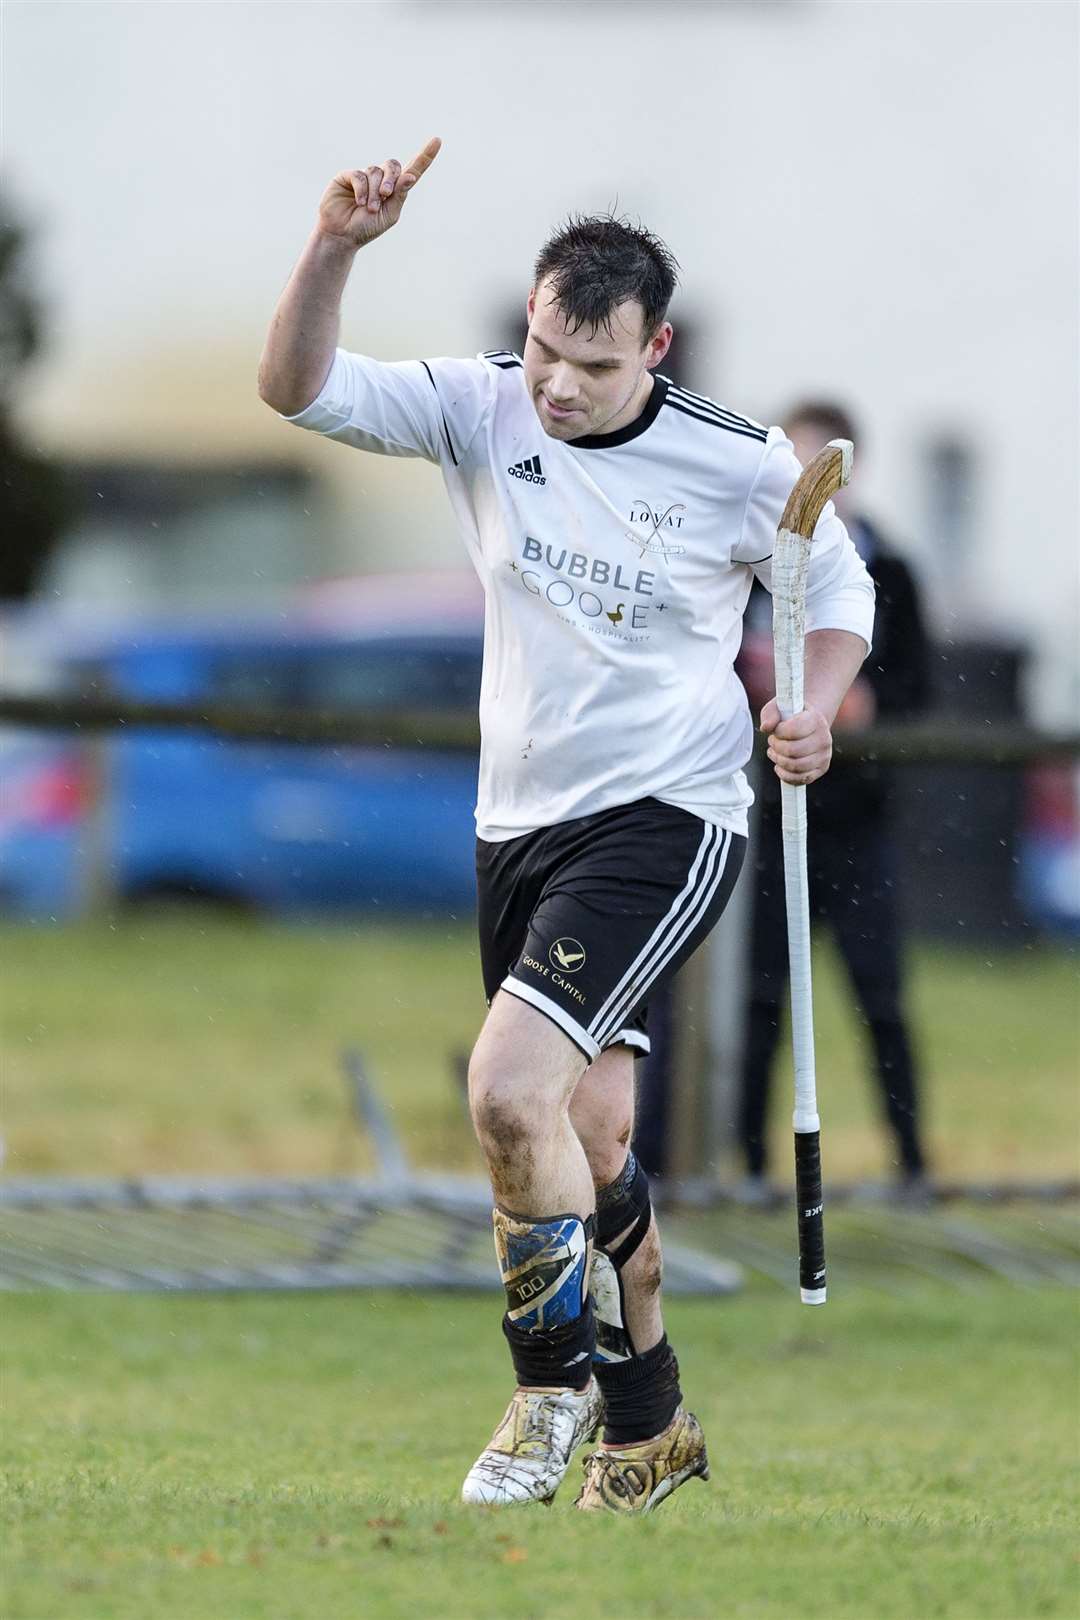 Lovat’s Greg Matheson scores his second goal of the game. Lovat Cup match, Lovat v Beauly, played at Balgate, Kiltarlity.